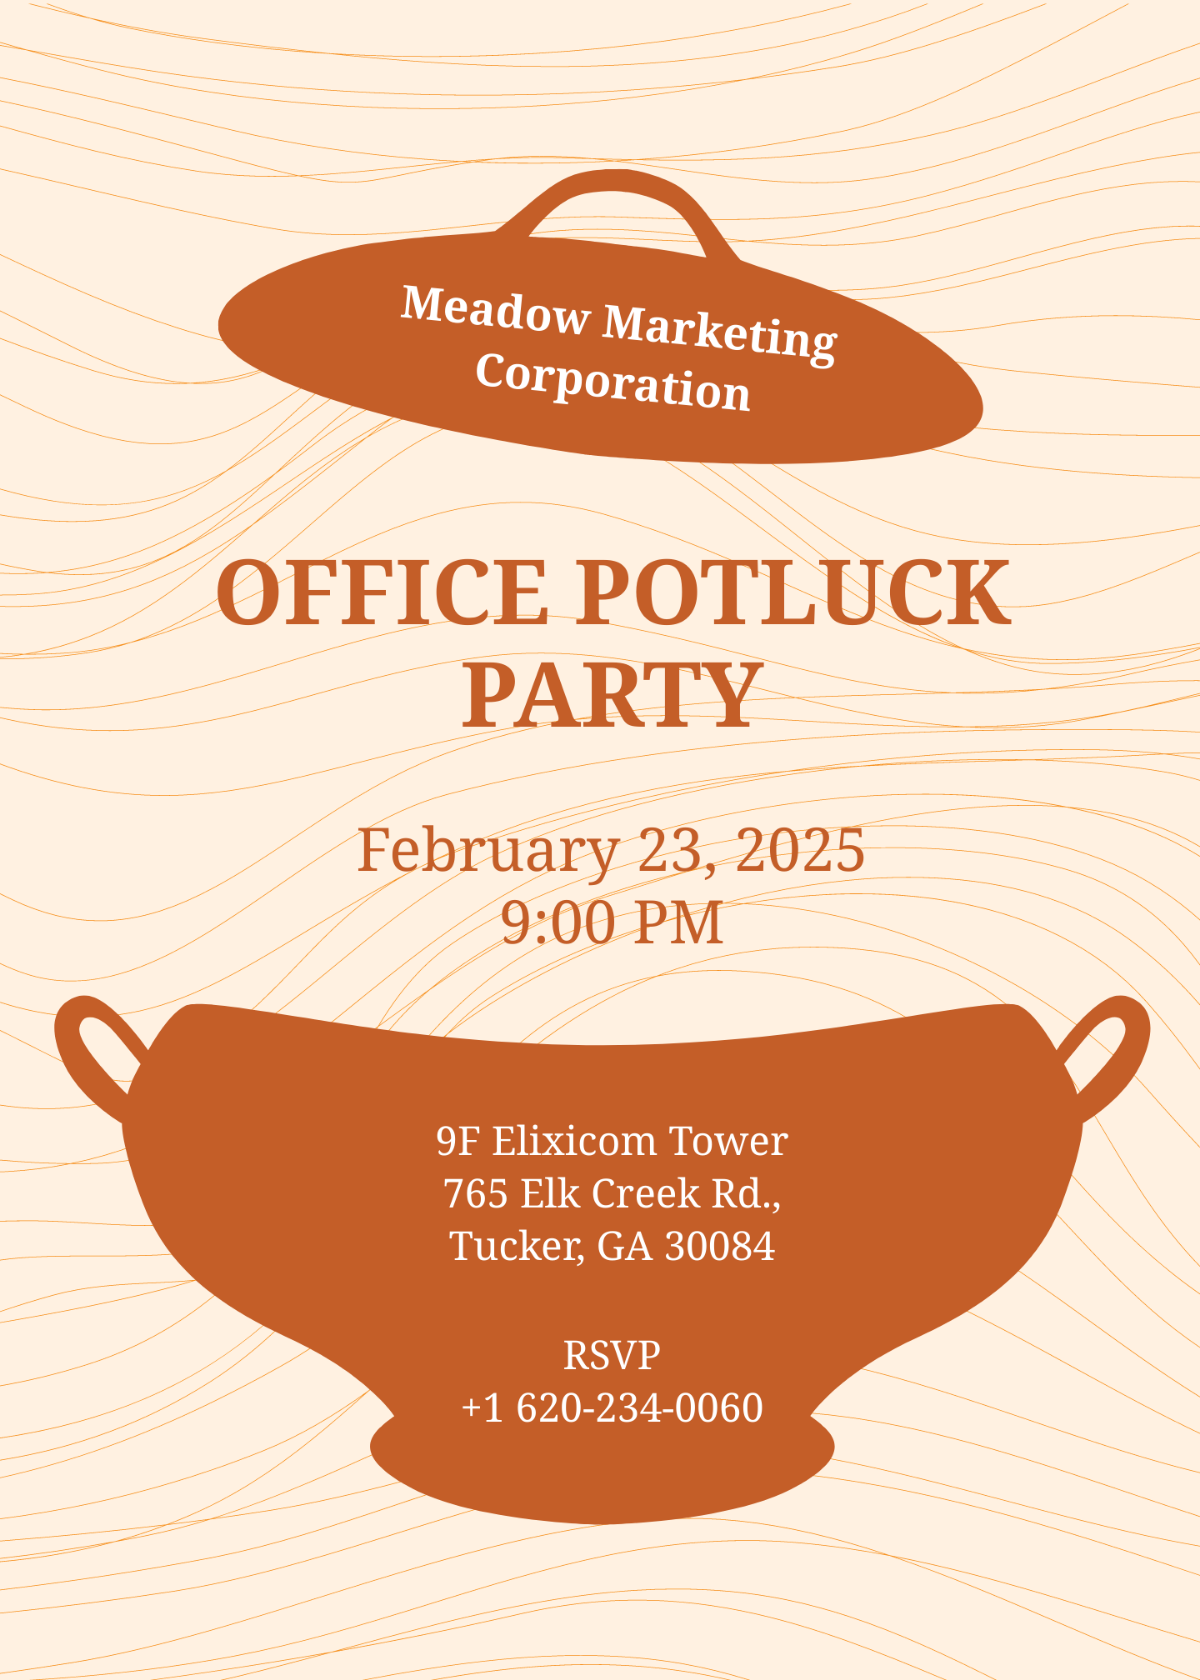 Office Potluck Party Invitation Template